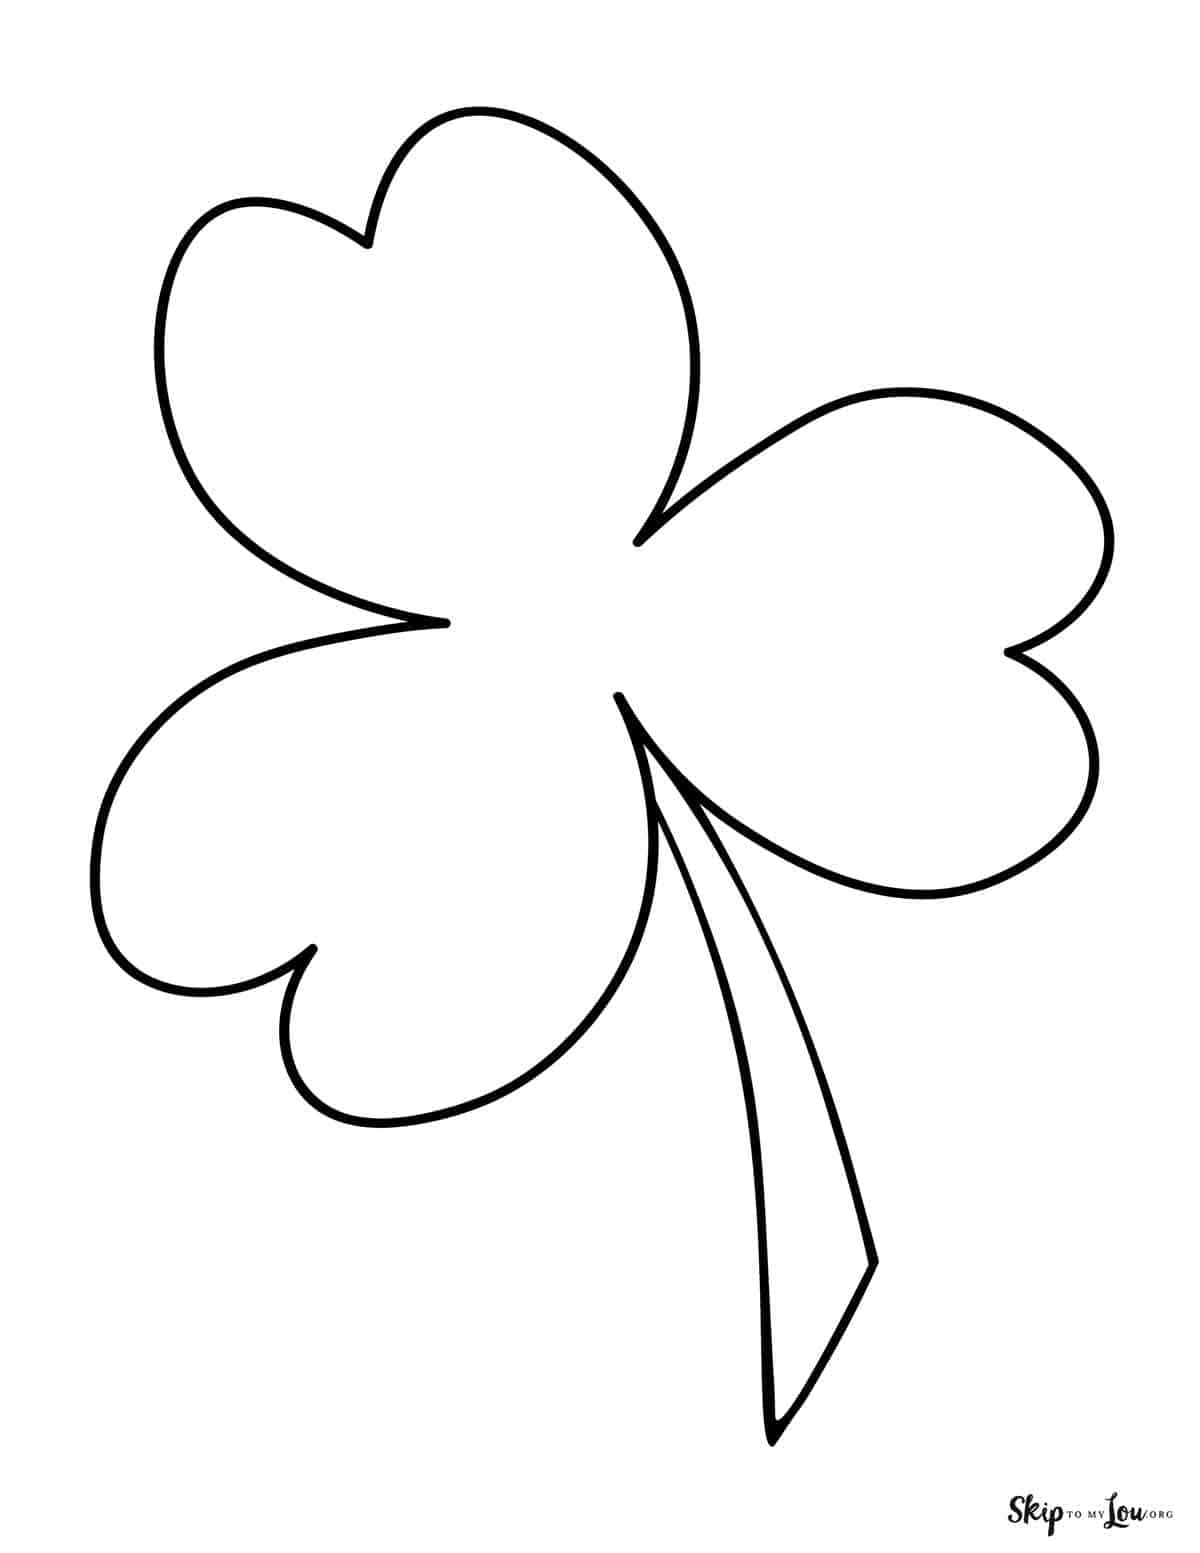 simple shamrock coloring page